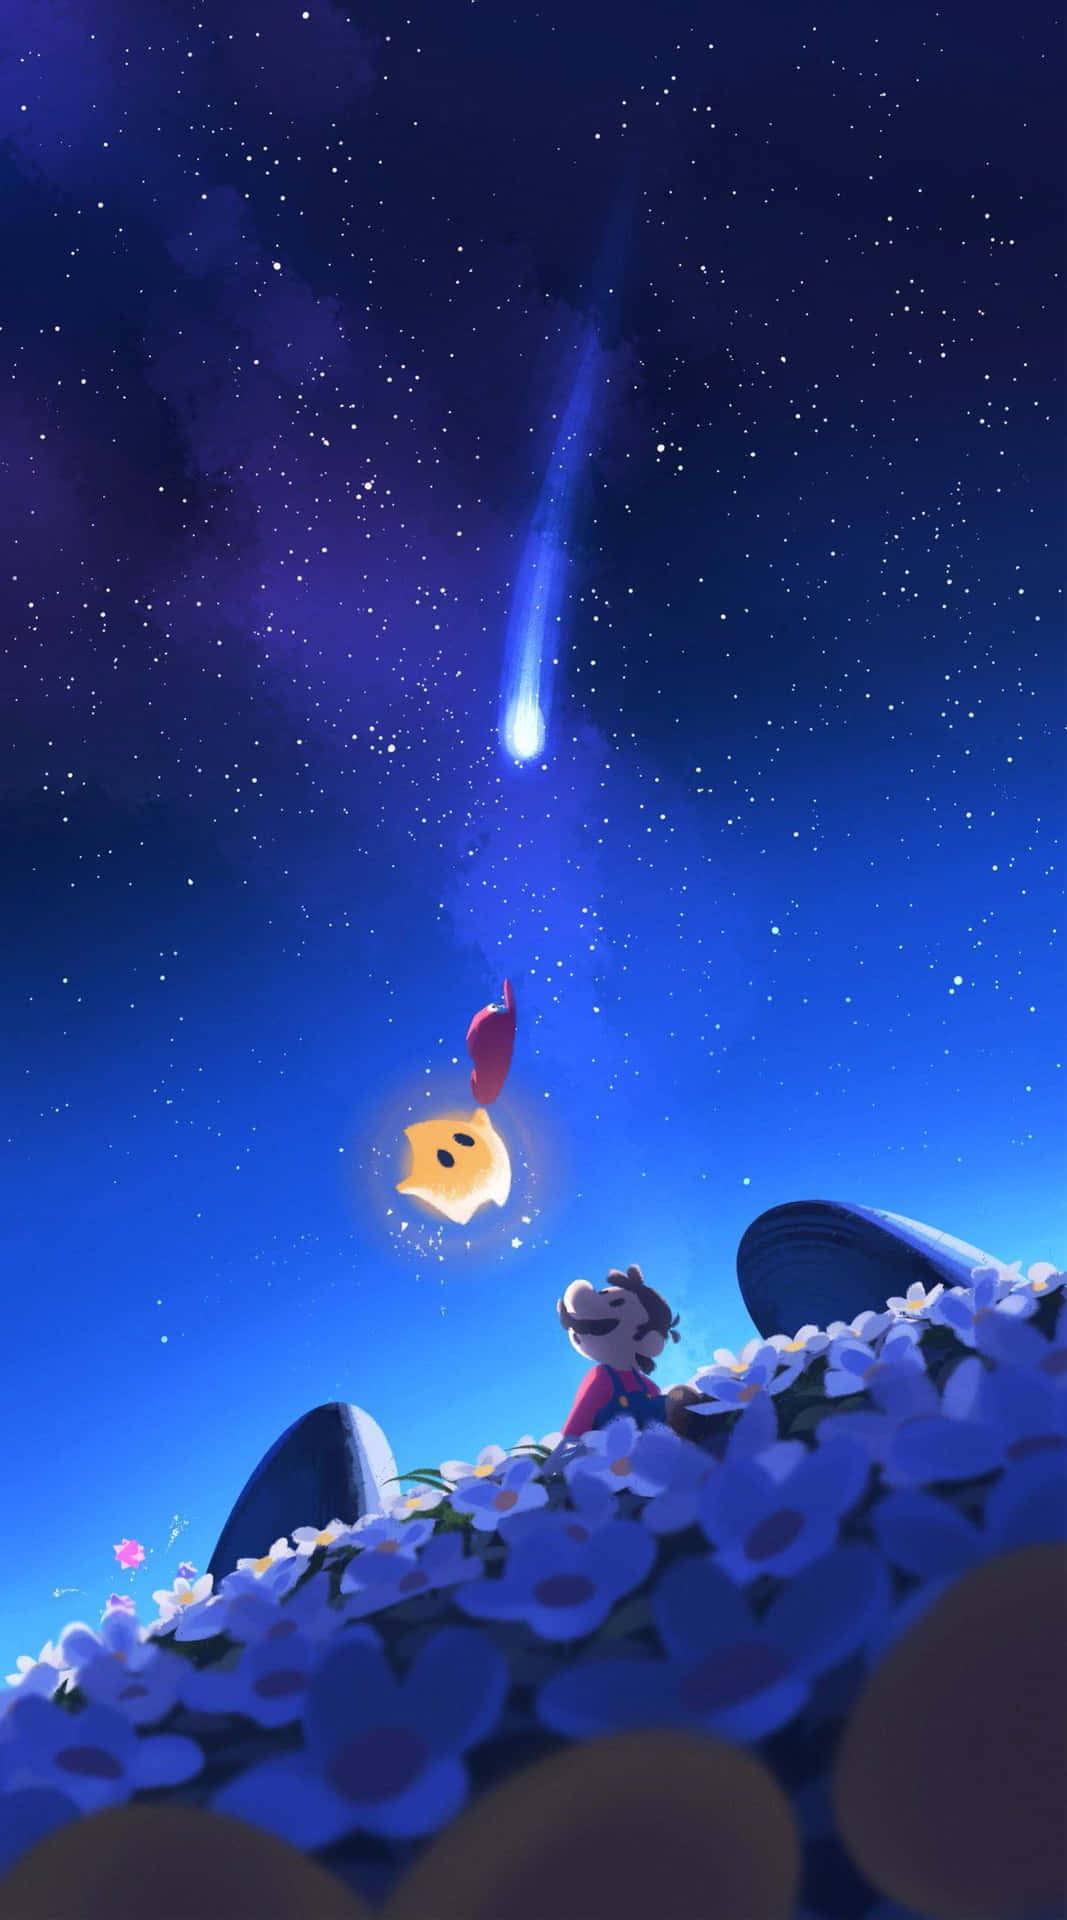 "Take on the Galaxy With Mario!" Wallpaper